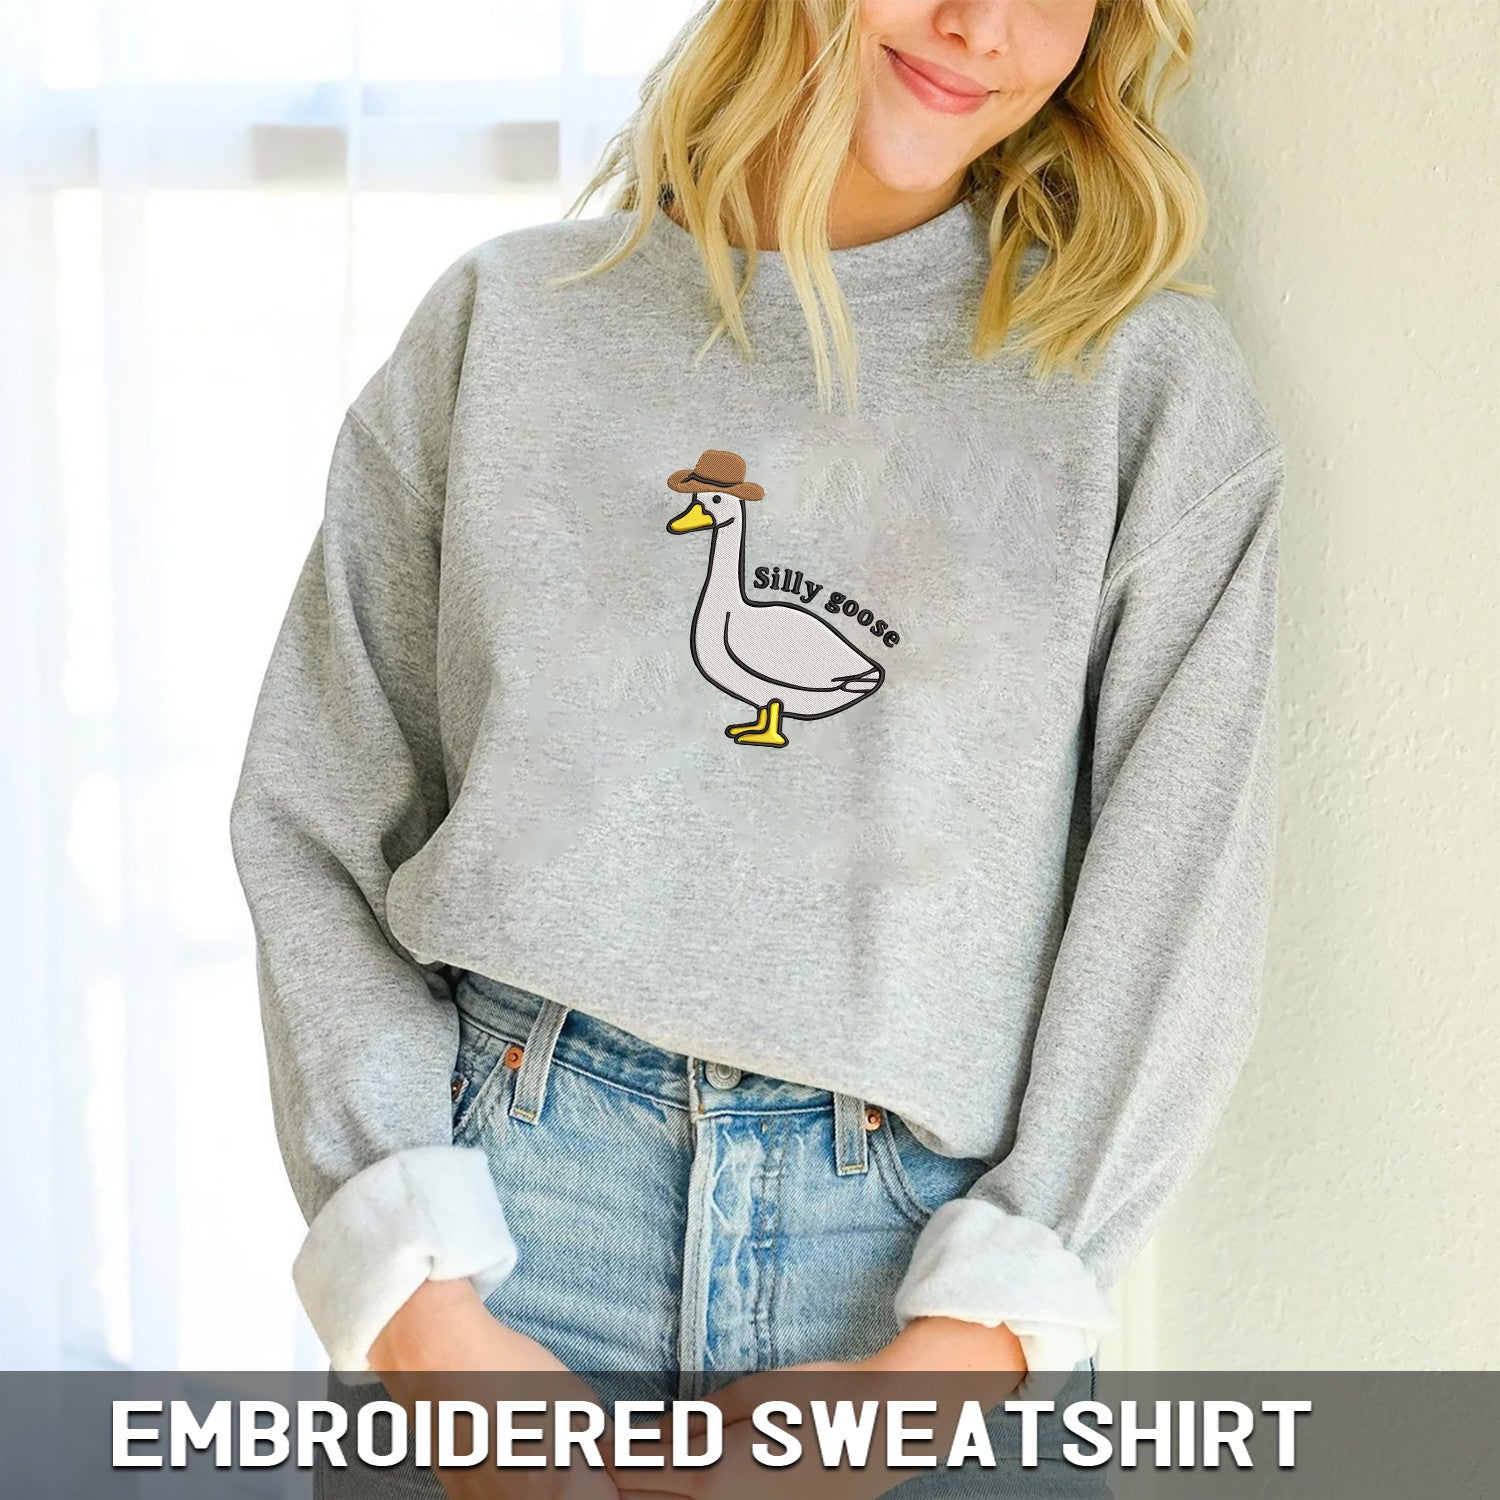 Embroidered Silly Goose Sweatshirt, Silly Goose Shirt, Funny Sweatshirt, Funny Embroidered Shirt